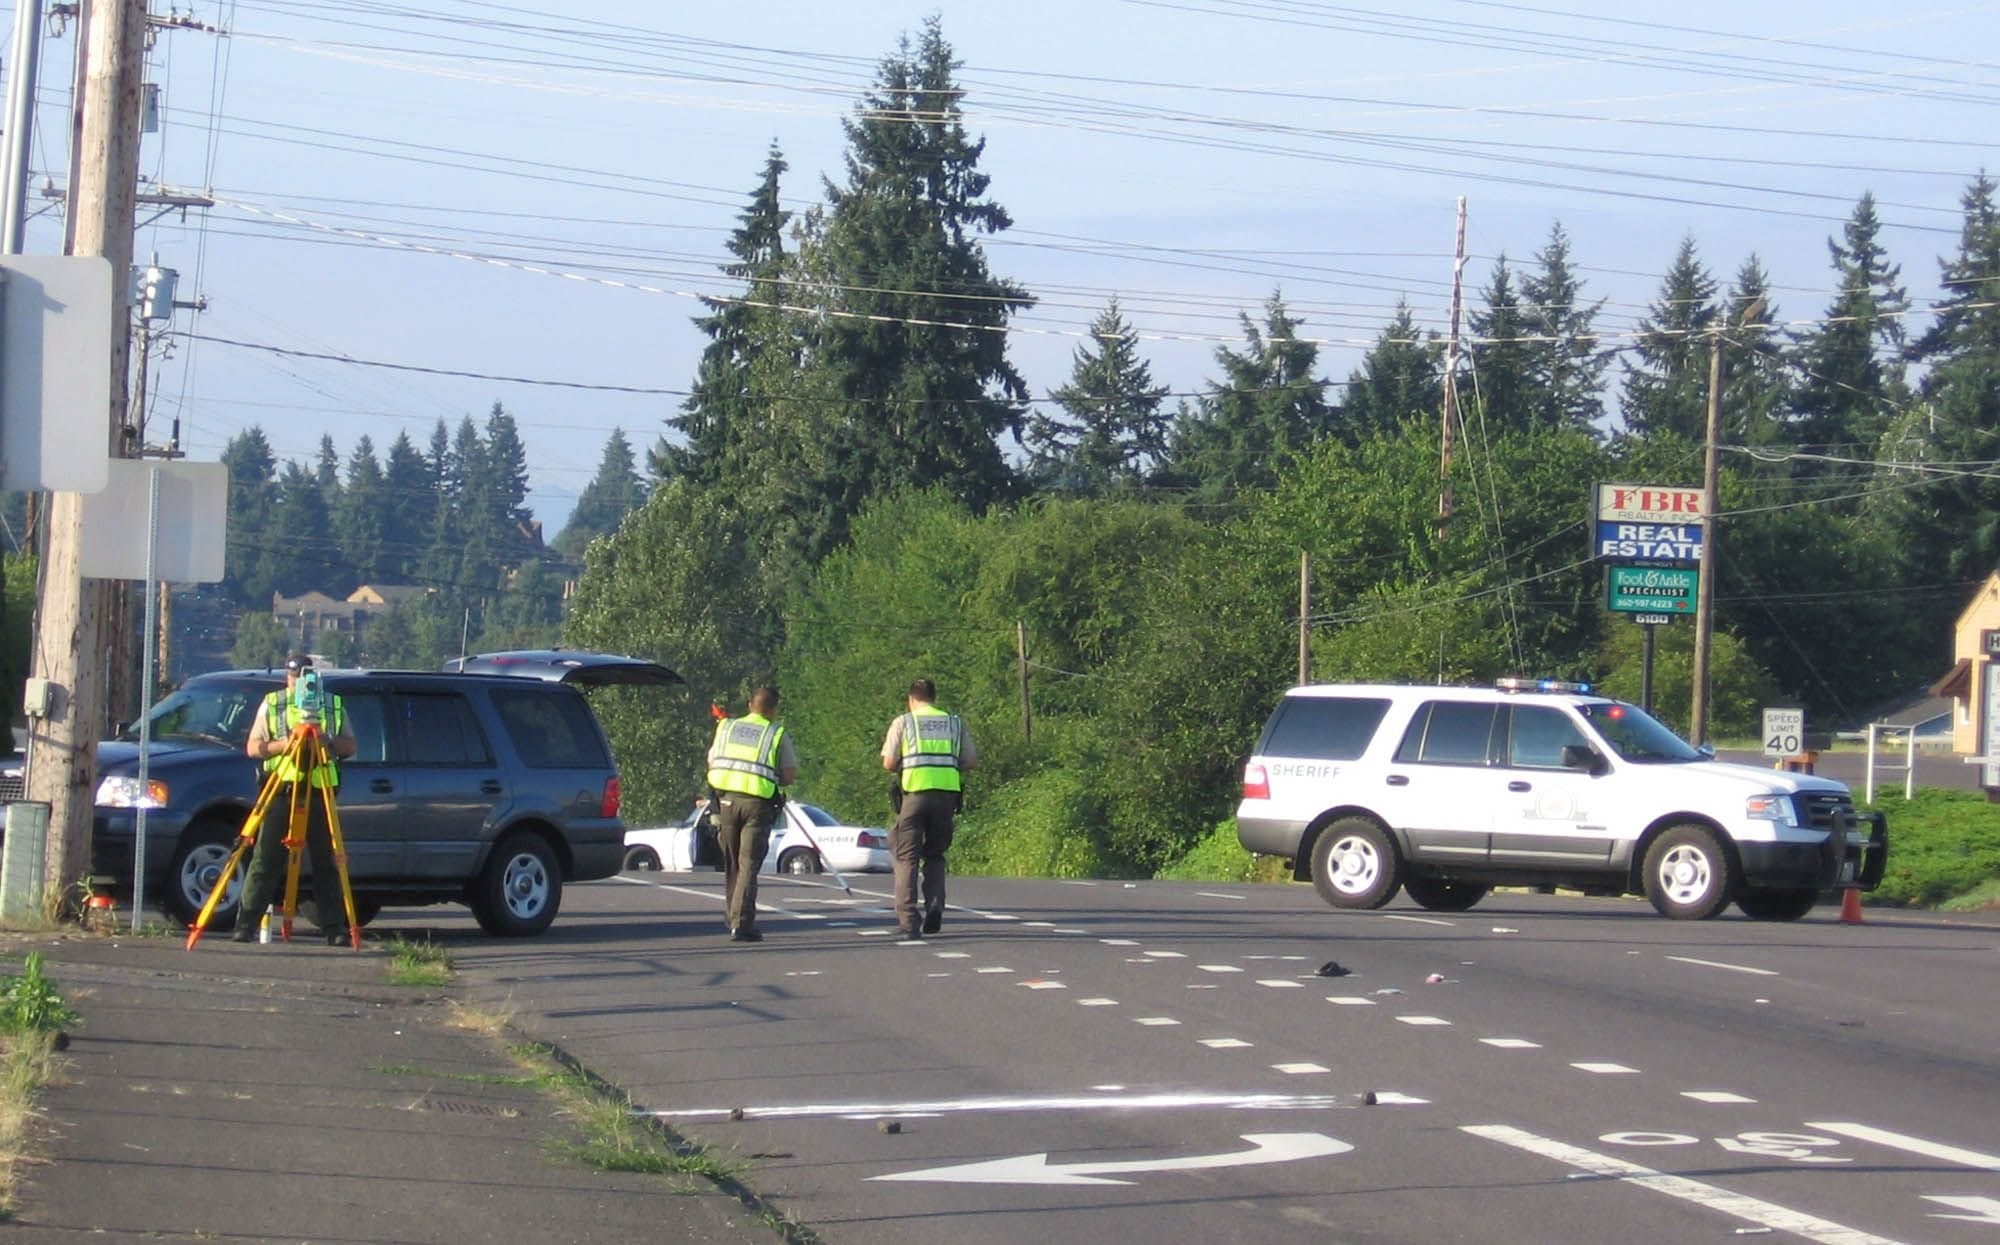 Sheriff's investigators process the scene of a crash that killed a pedestrian on Highway 99 this morning.